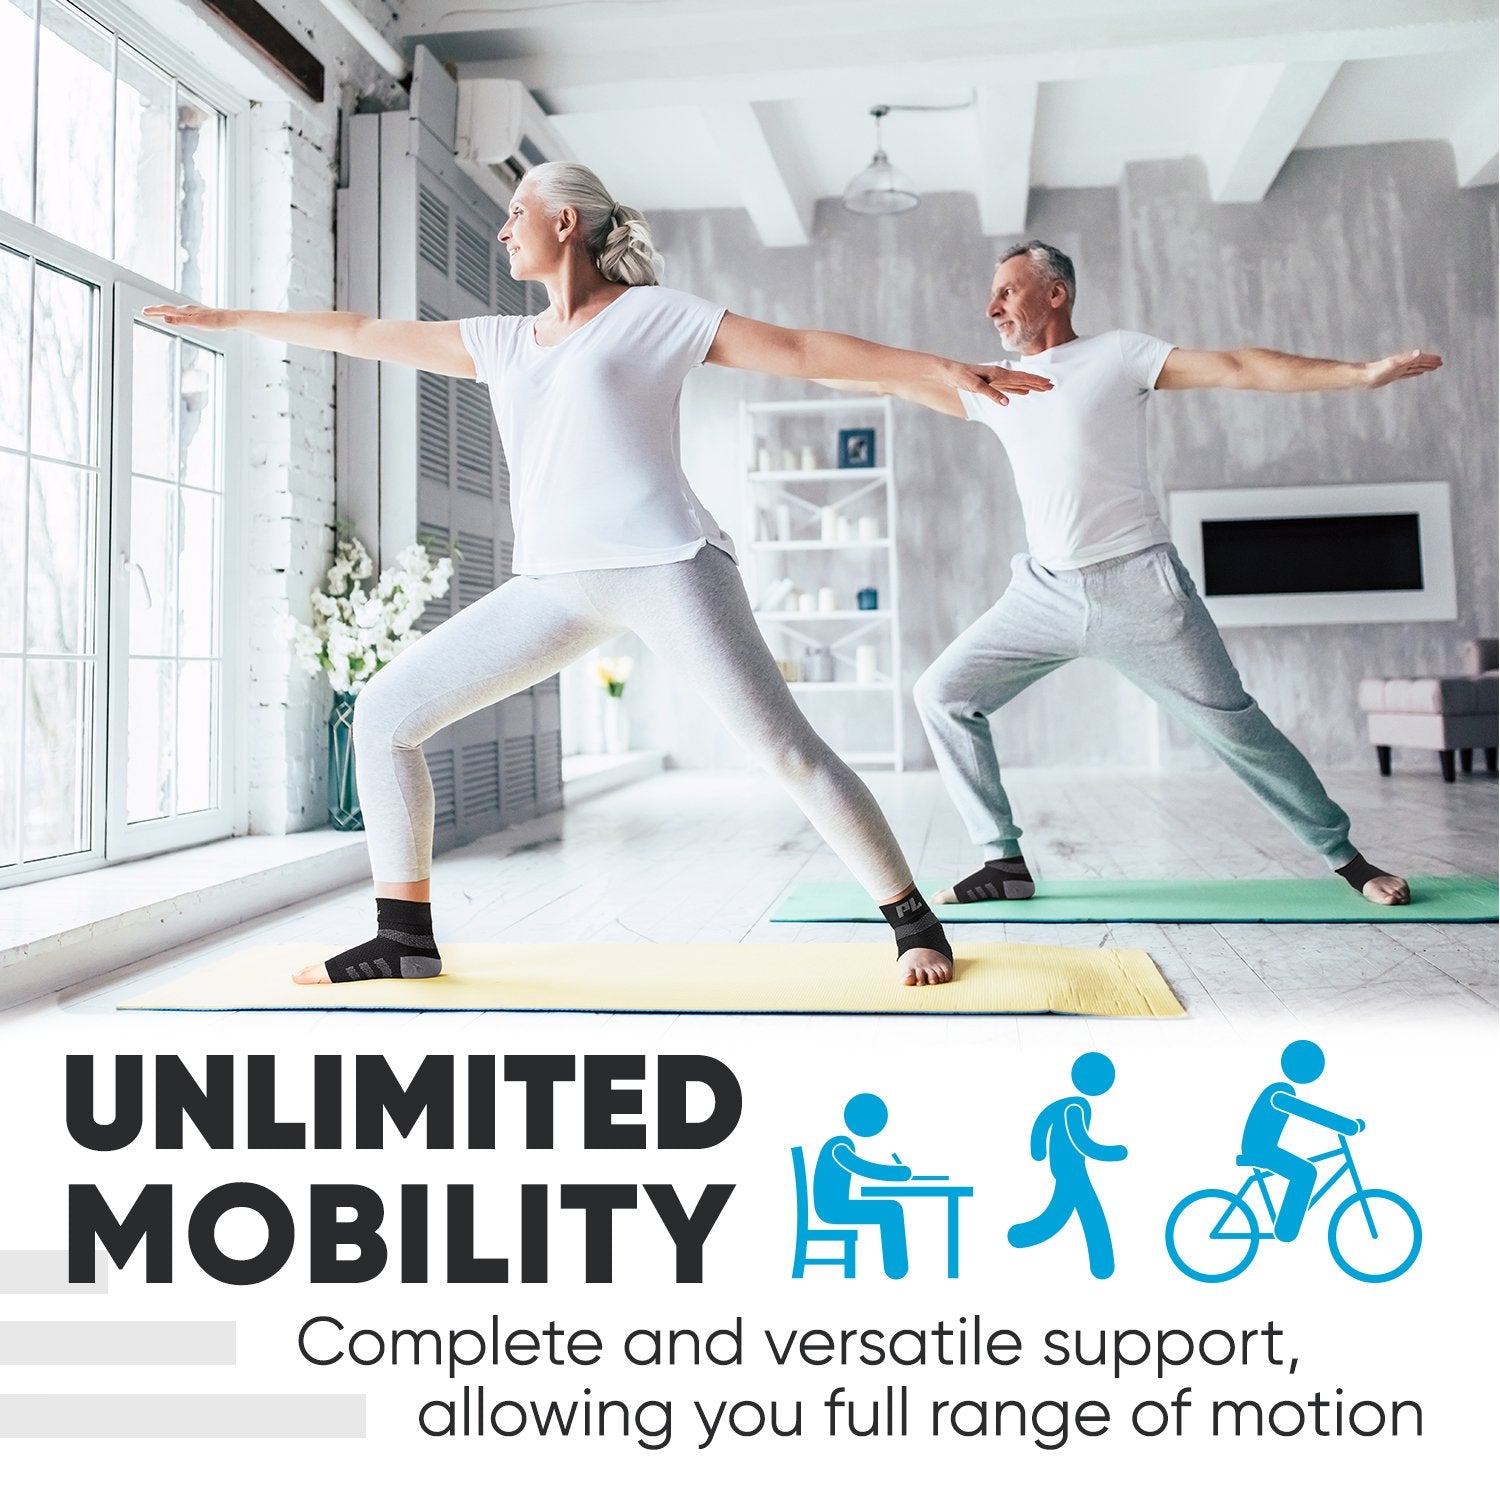 Powerlix plantar fasciitis support socks on two models stretching on yoga mats. Text below reads. "Unlimted mobility. Complete and versatile support allowing you full range of motion."